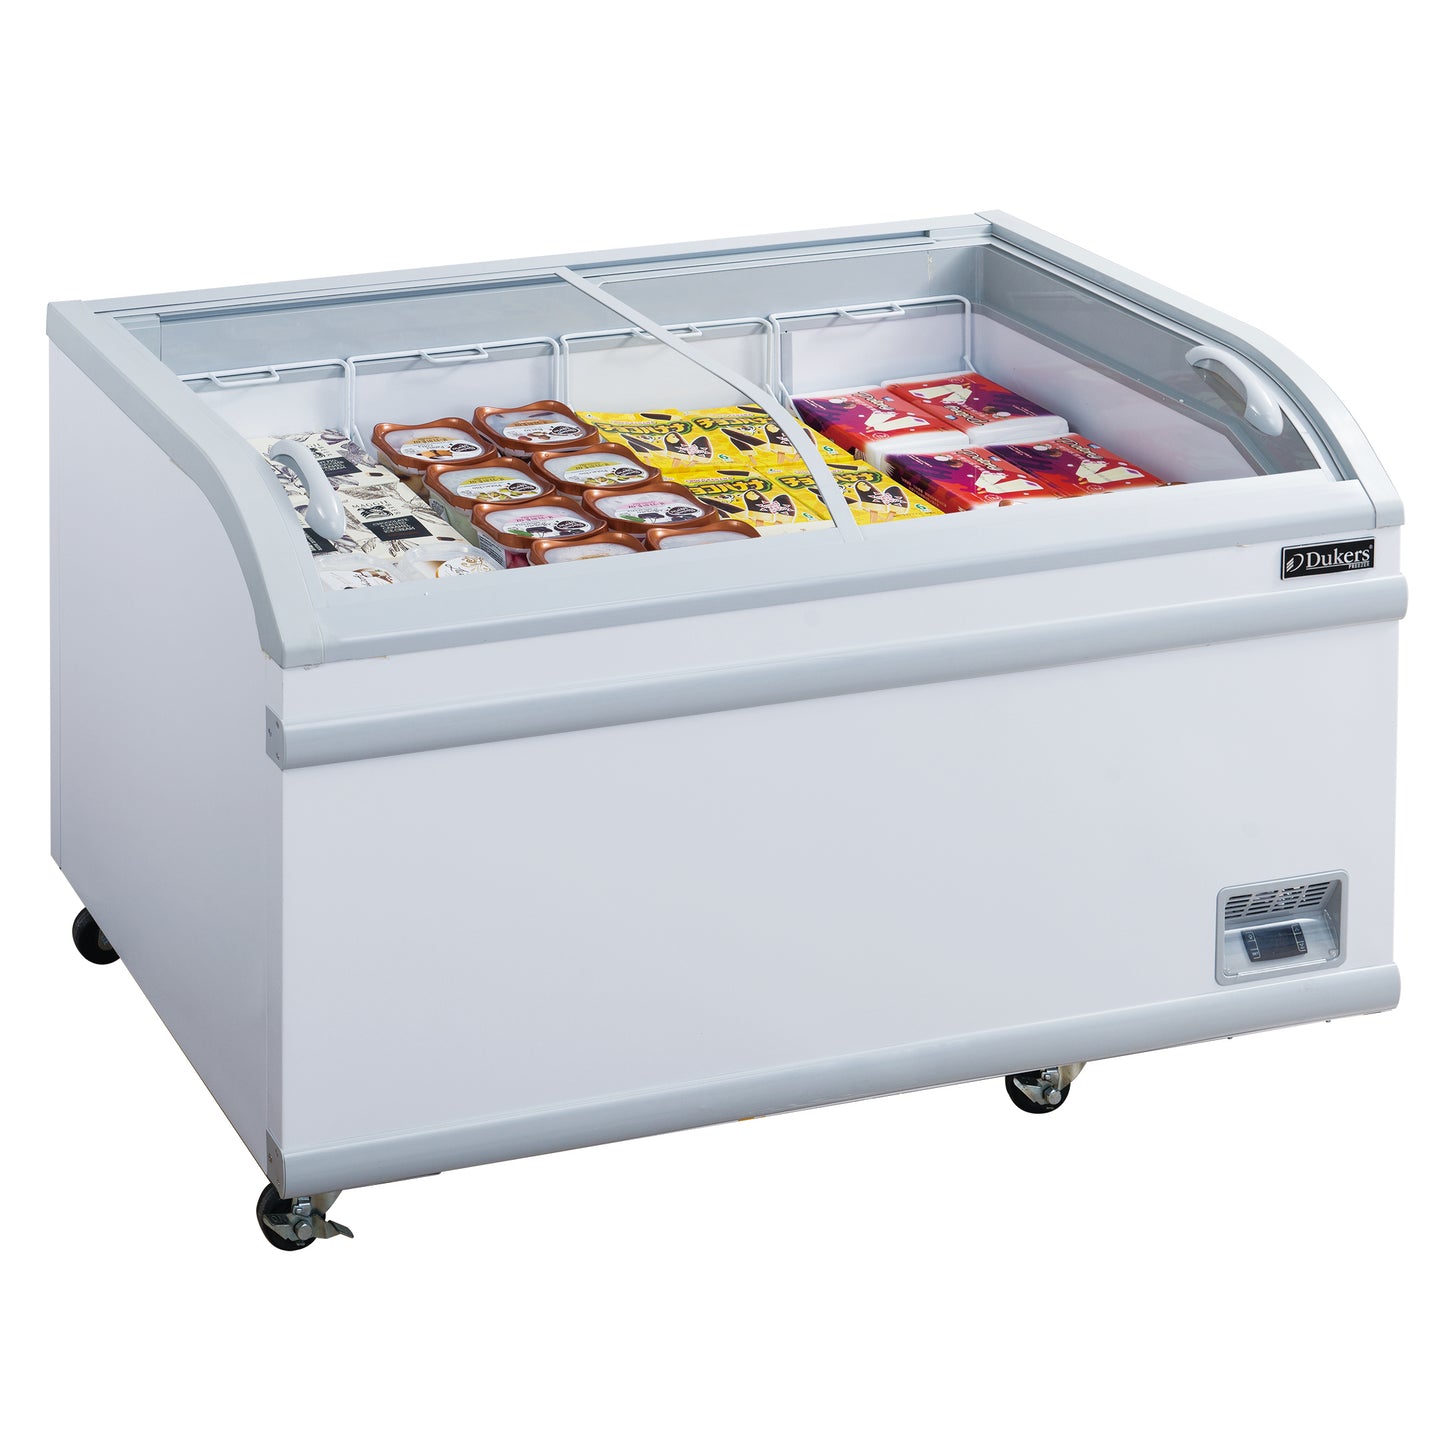 Dukers WD-700Y Commercial Chest Freezer